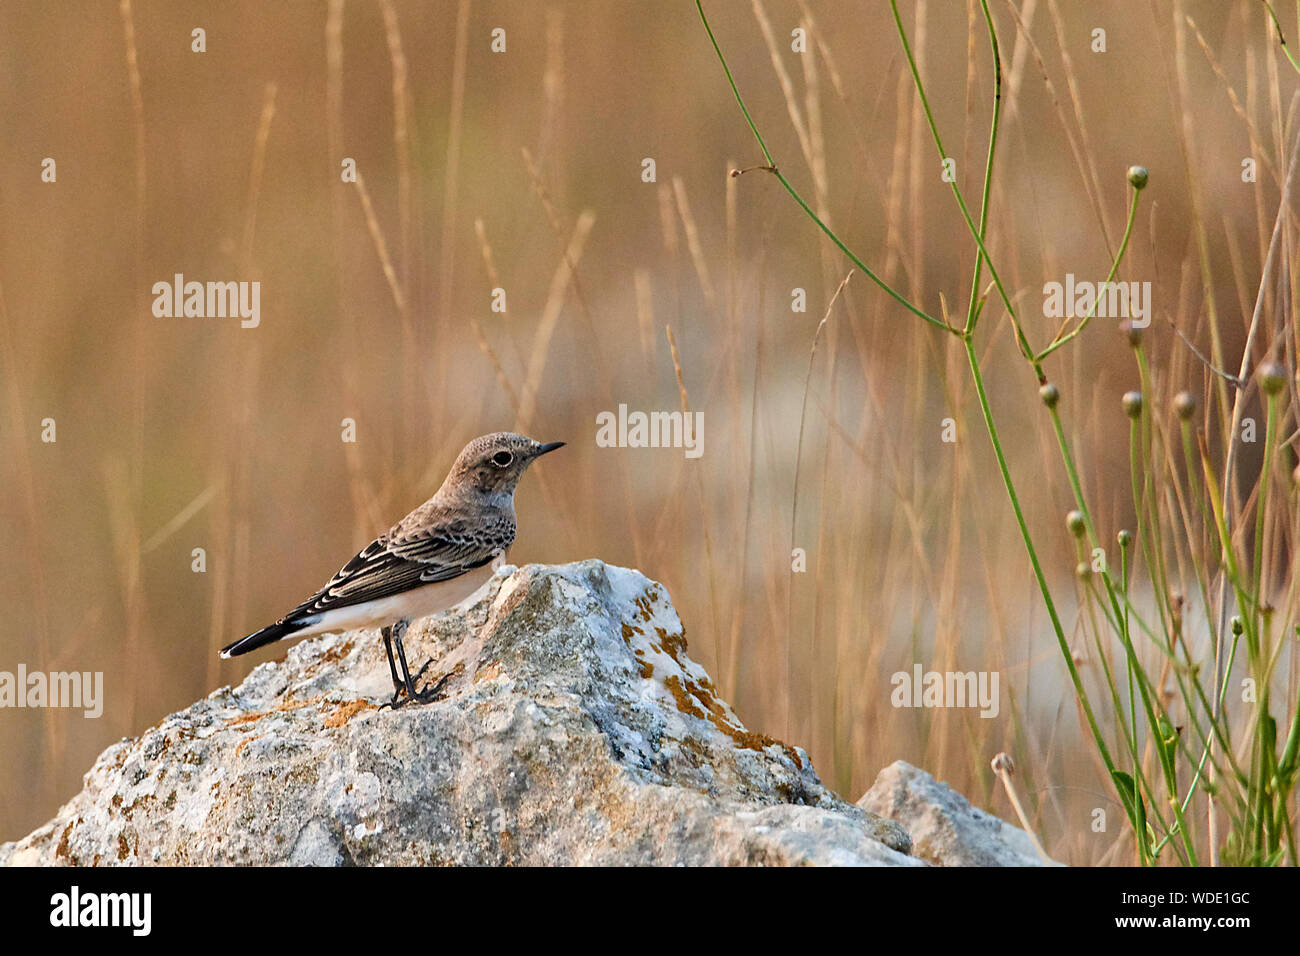 The pied wheatear Oenanthe pleschanka is a wheatear, a small insectivorous passerine bird that was formerly classed as a member of the thrush family T Stock Photo